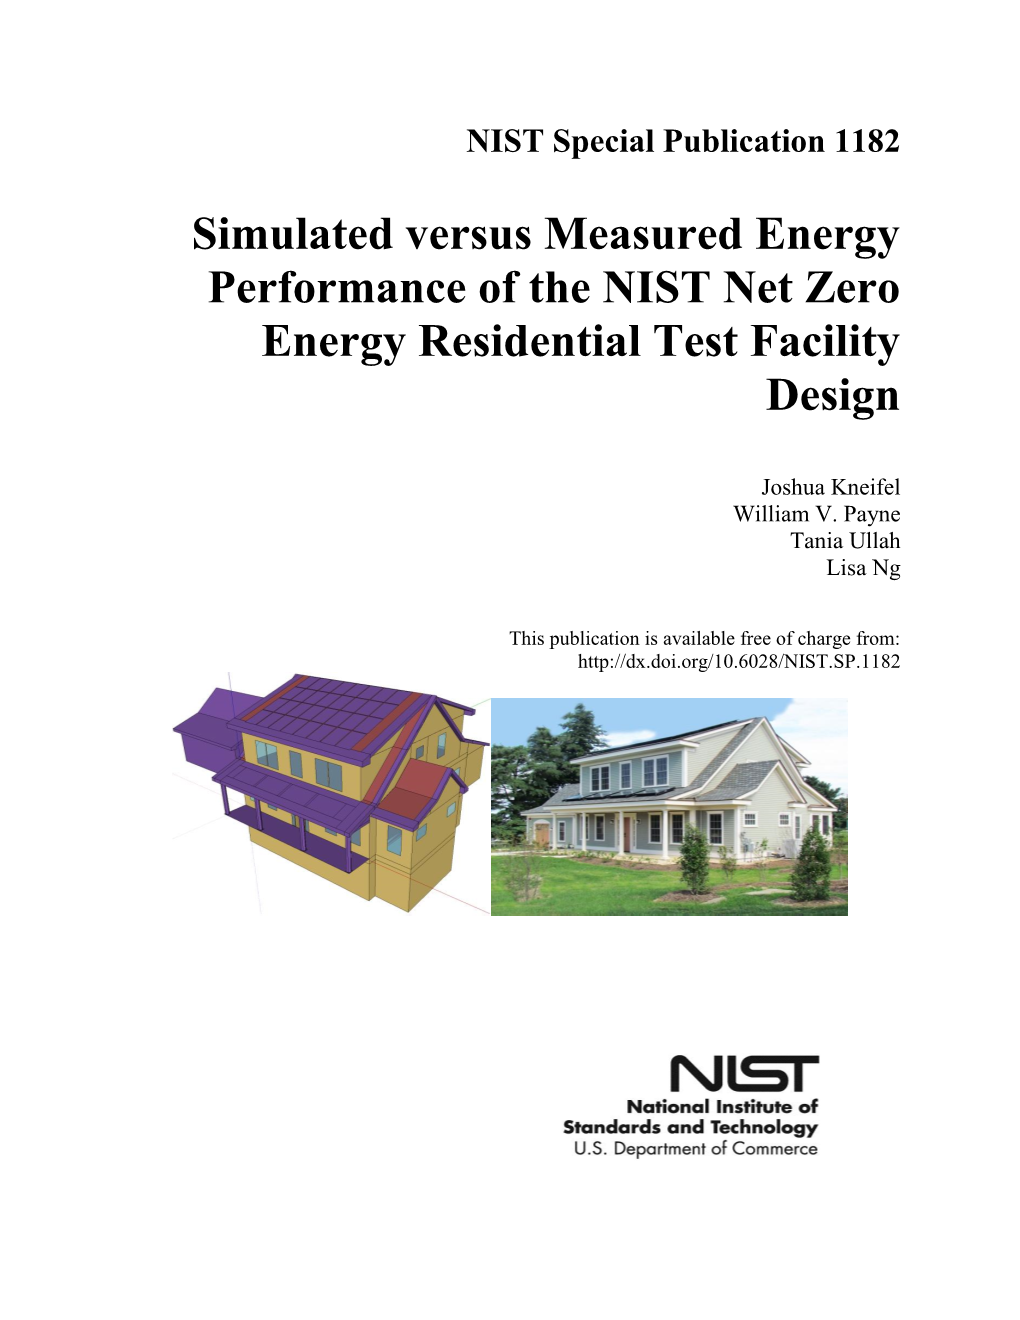 Simulated Versus Measured Energy Performance of the NIST Net Zero Energy Residential Test Facility Design